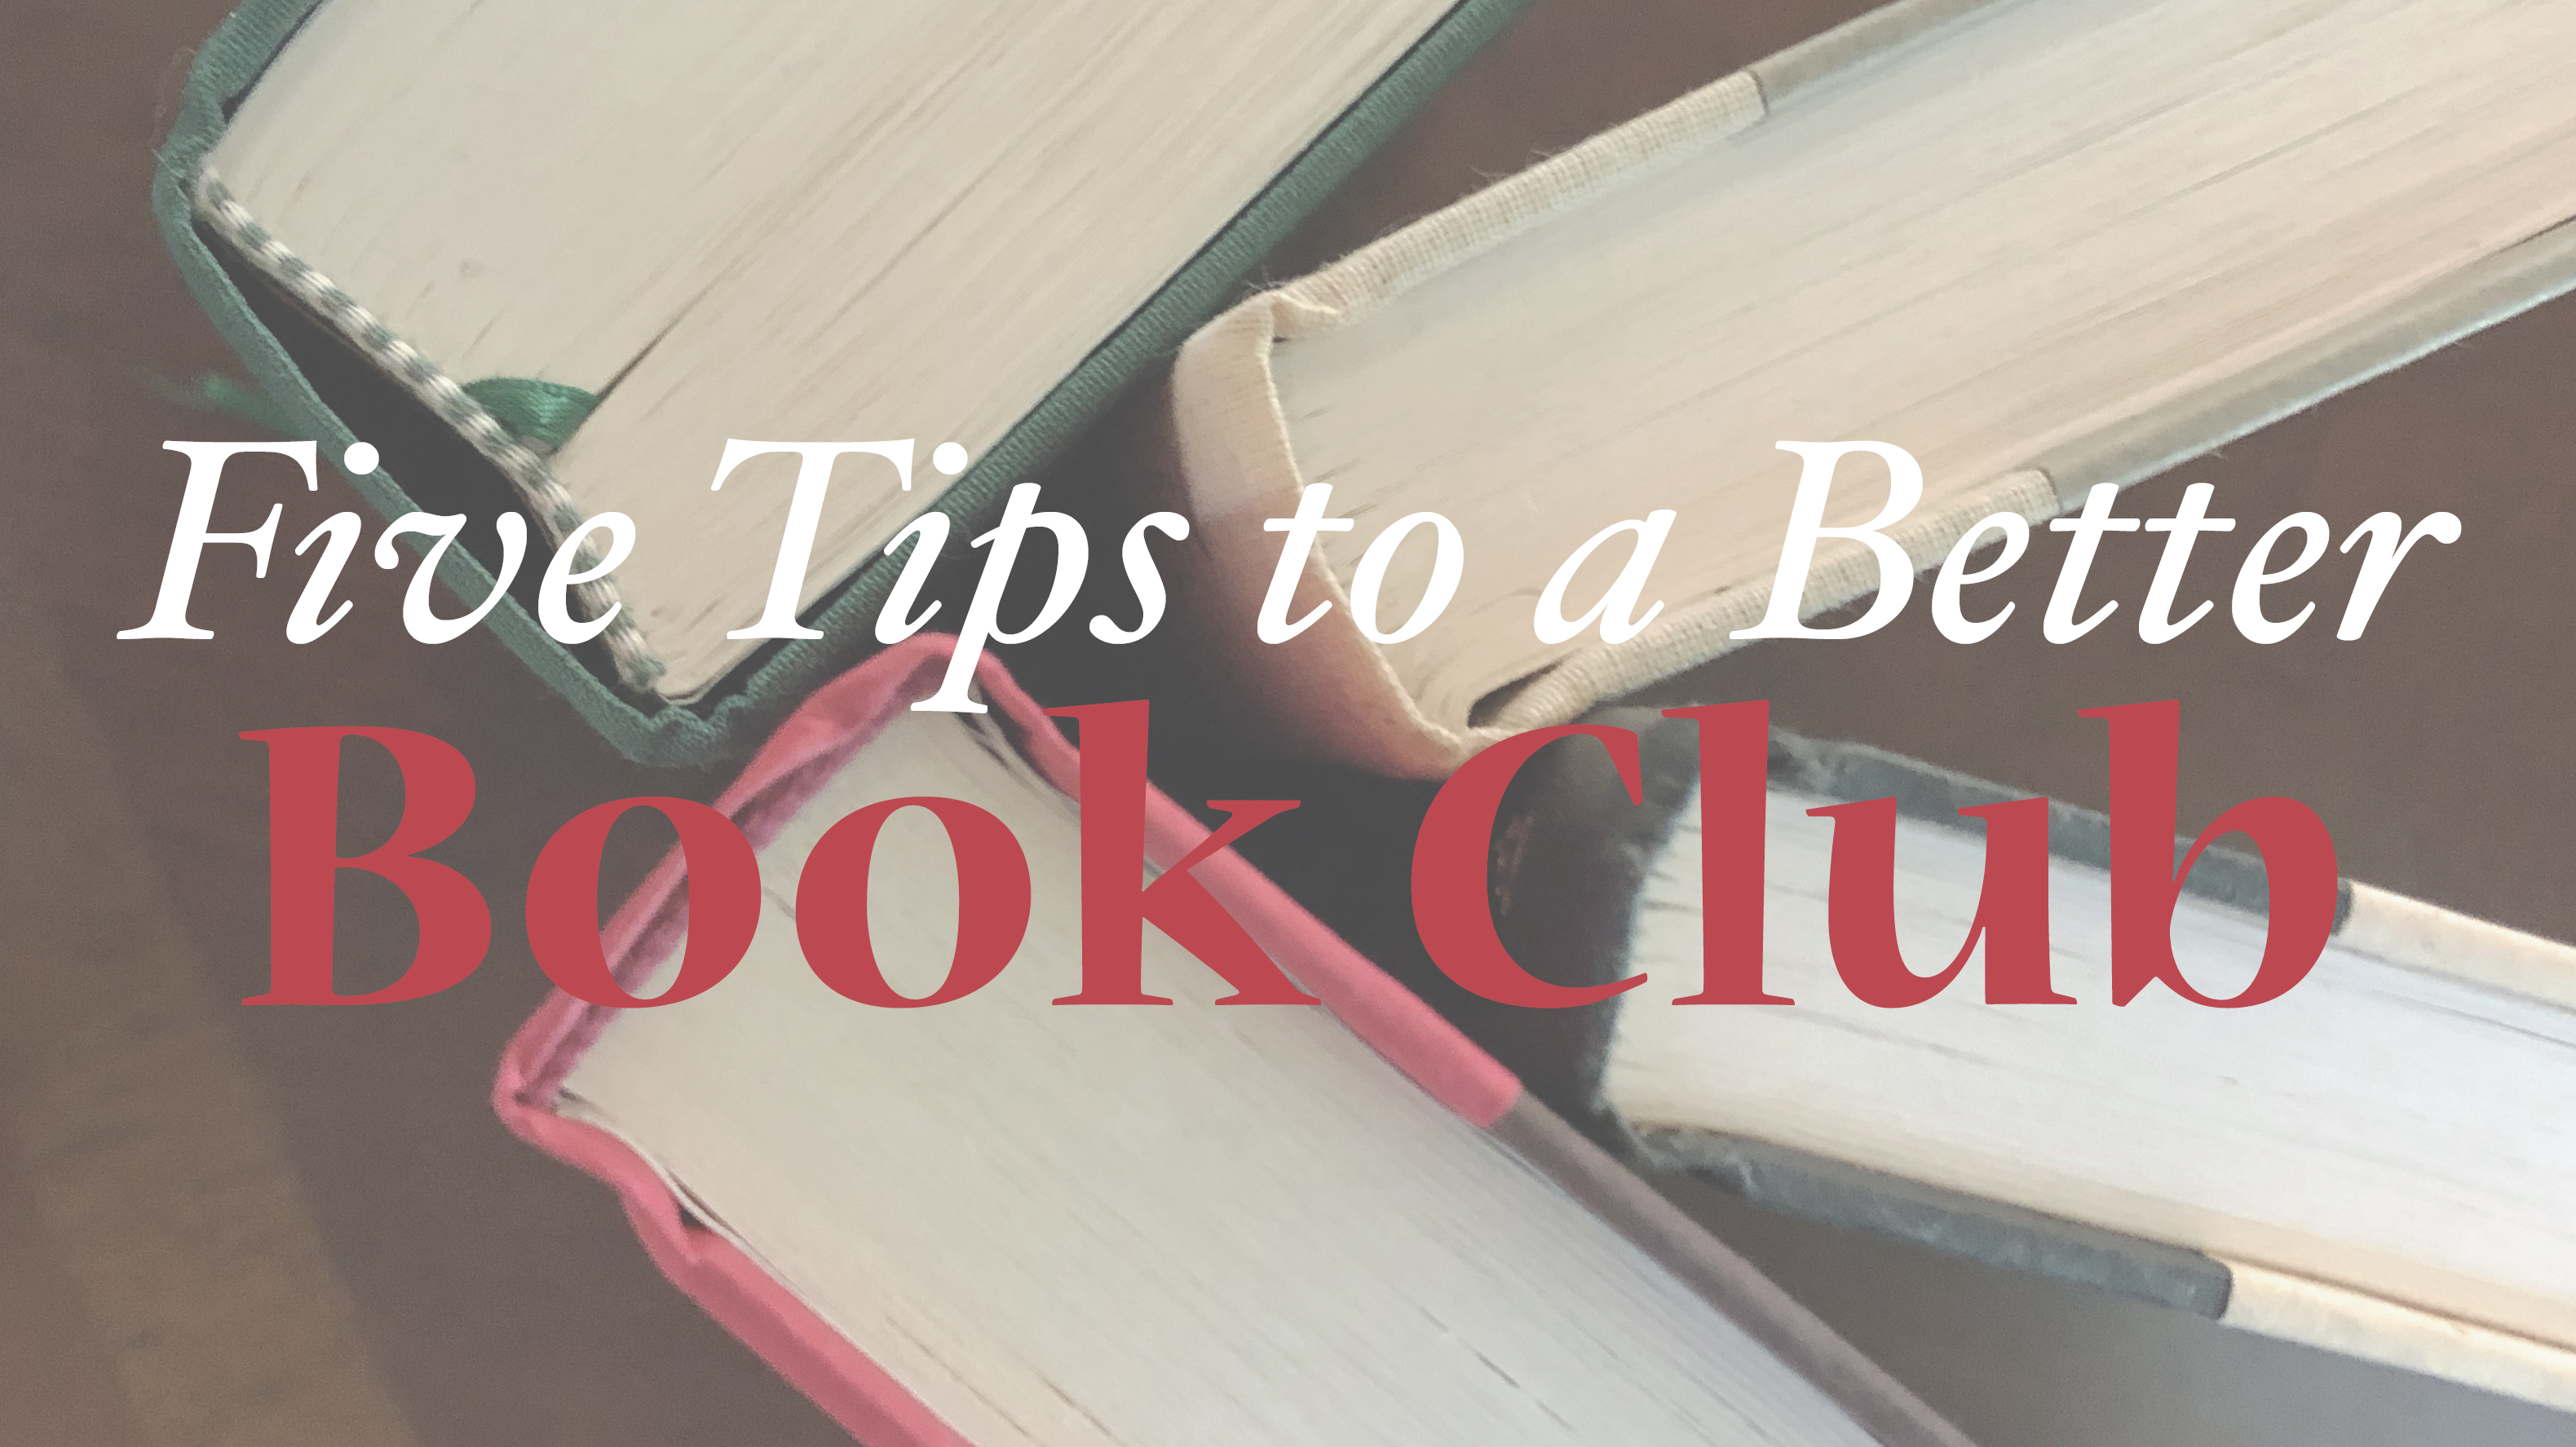 Tips for Book Clubs